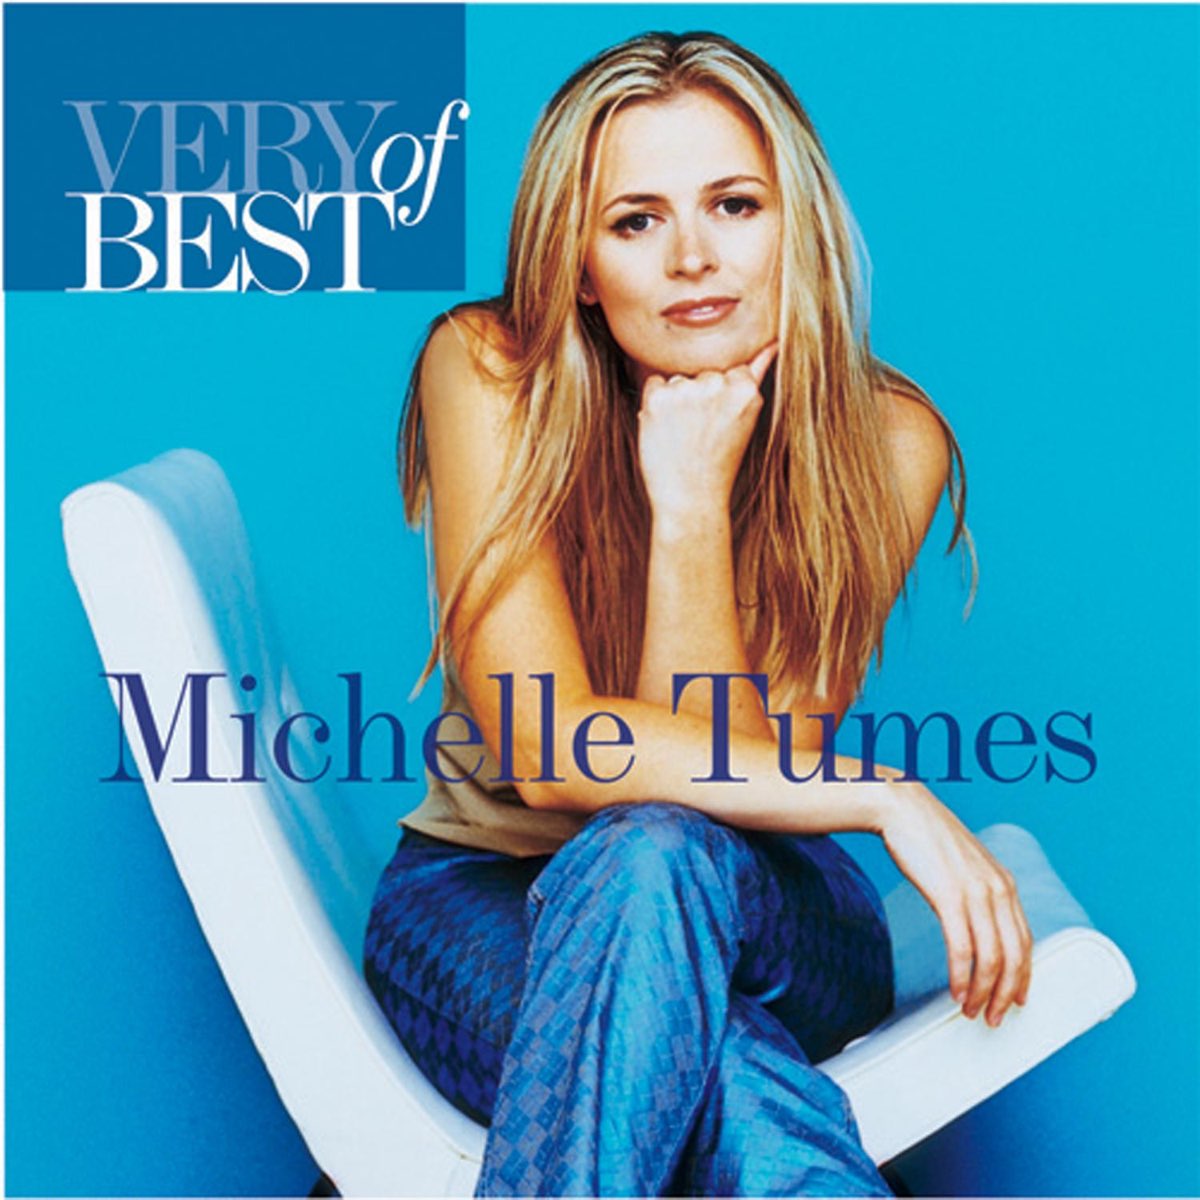 ‎Very Best of Michelle Tumes - Album by Michelle Tumes - Apple Music